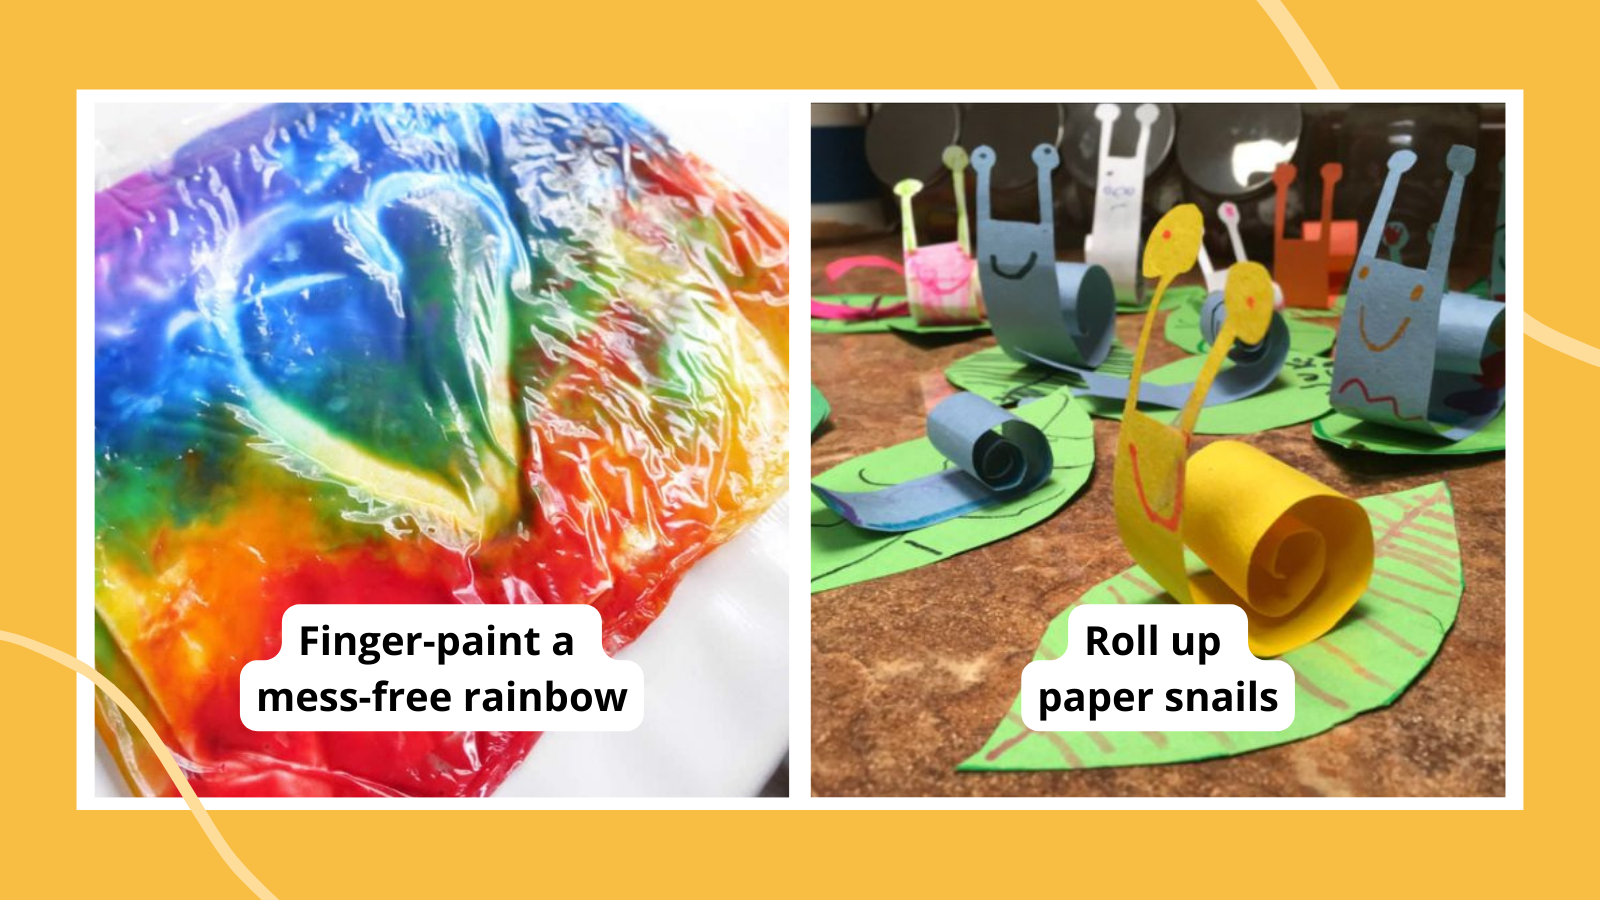 Examples of kindergarten art projects, including a rainbow finger painted heart in a plastic bag and snails made from rolled up paper.